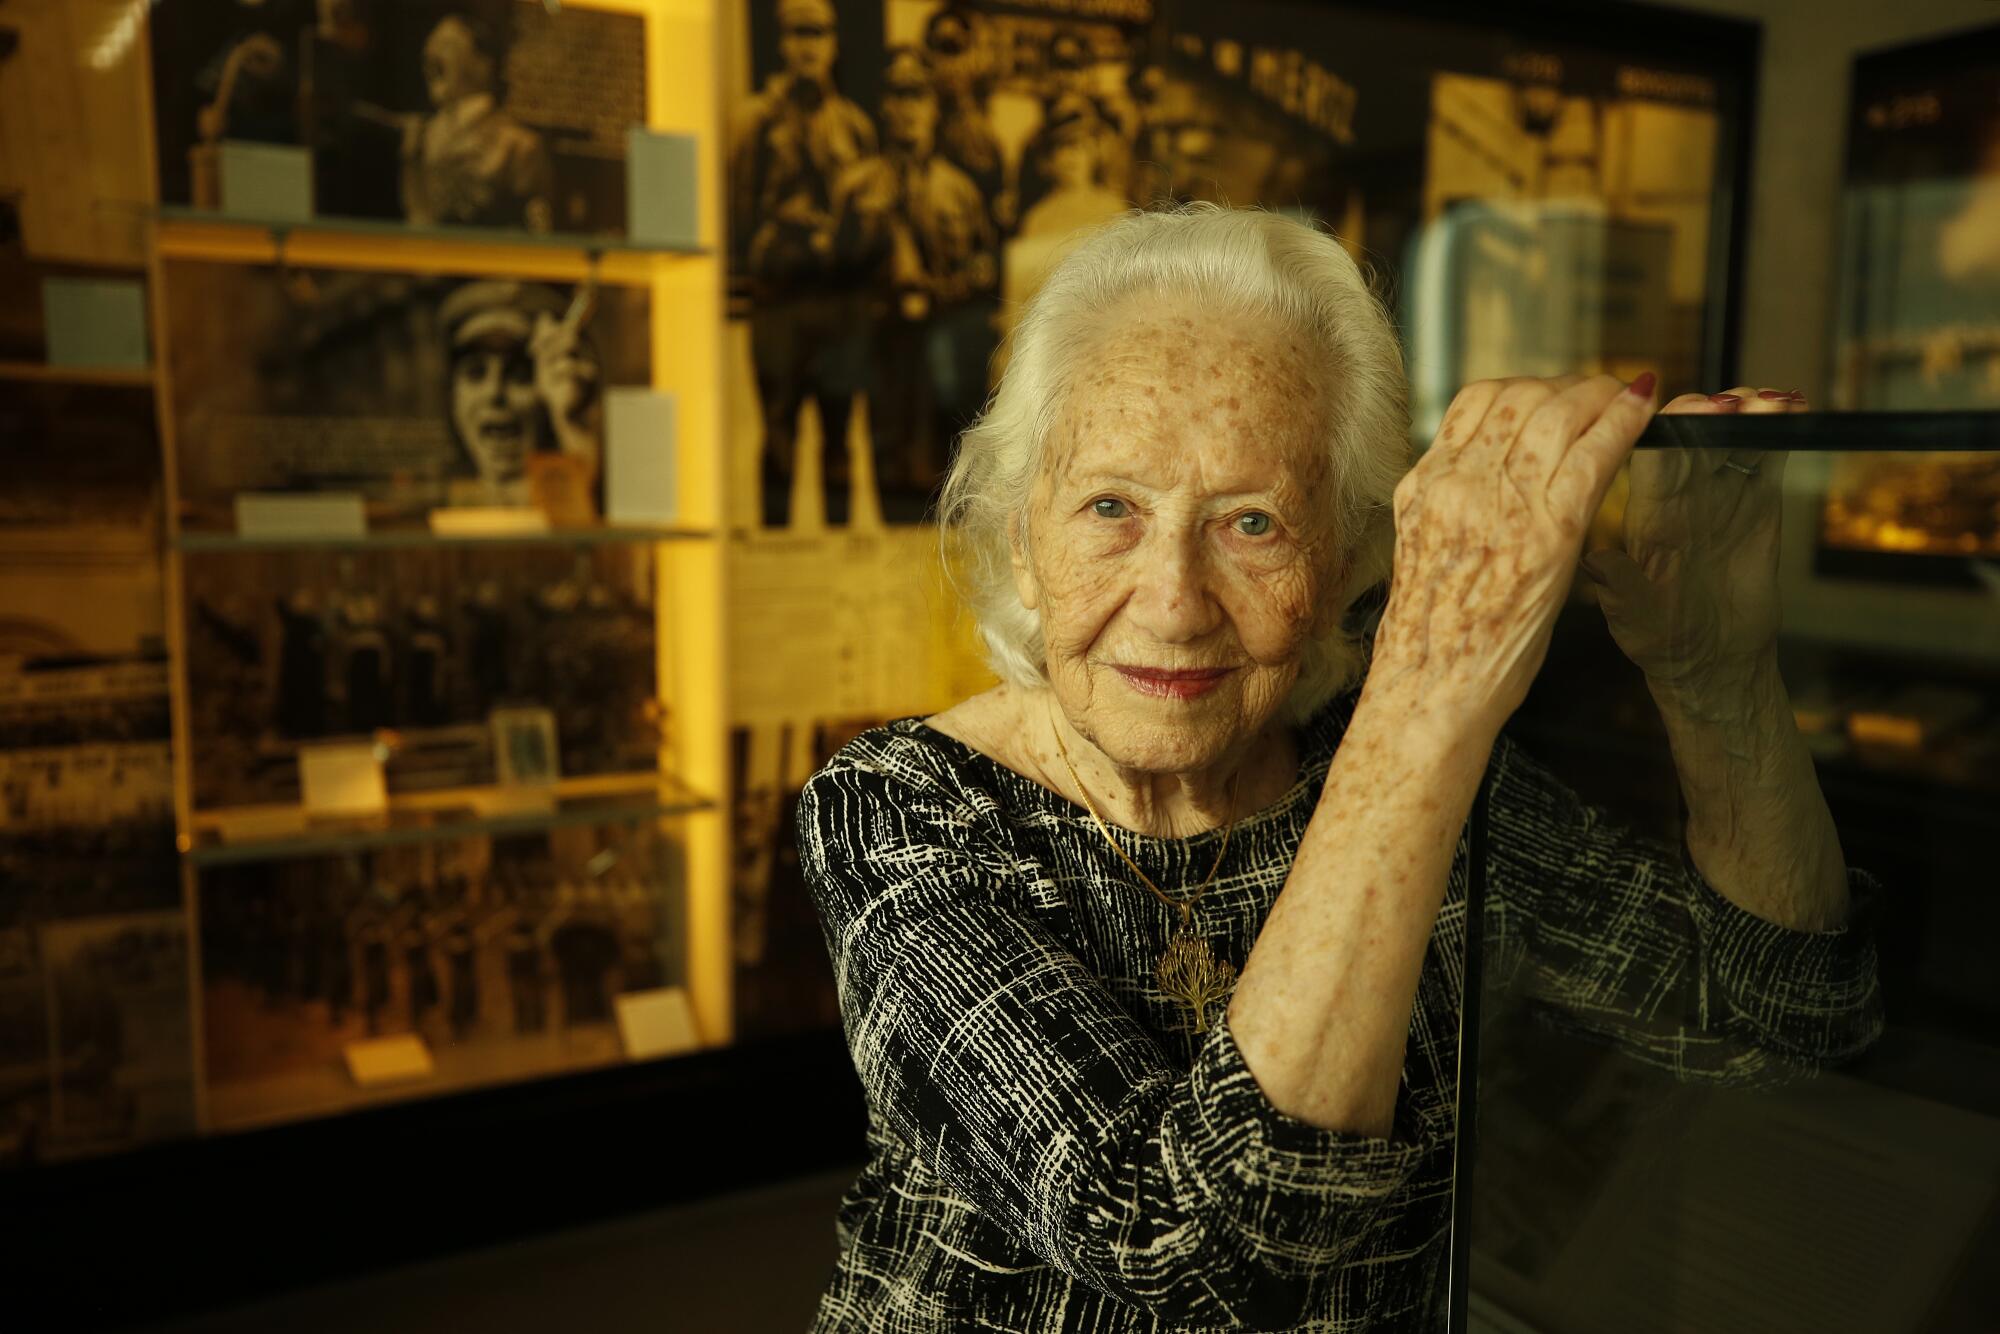  A woman poses with her hands atop a glass display case. Behind her, historical images and artifacts are on display.